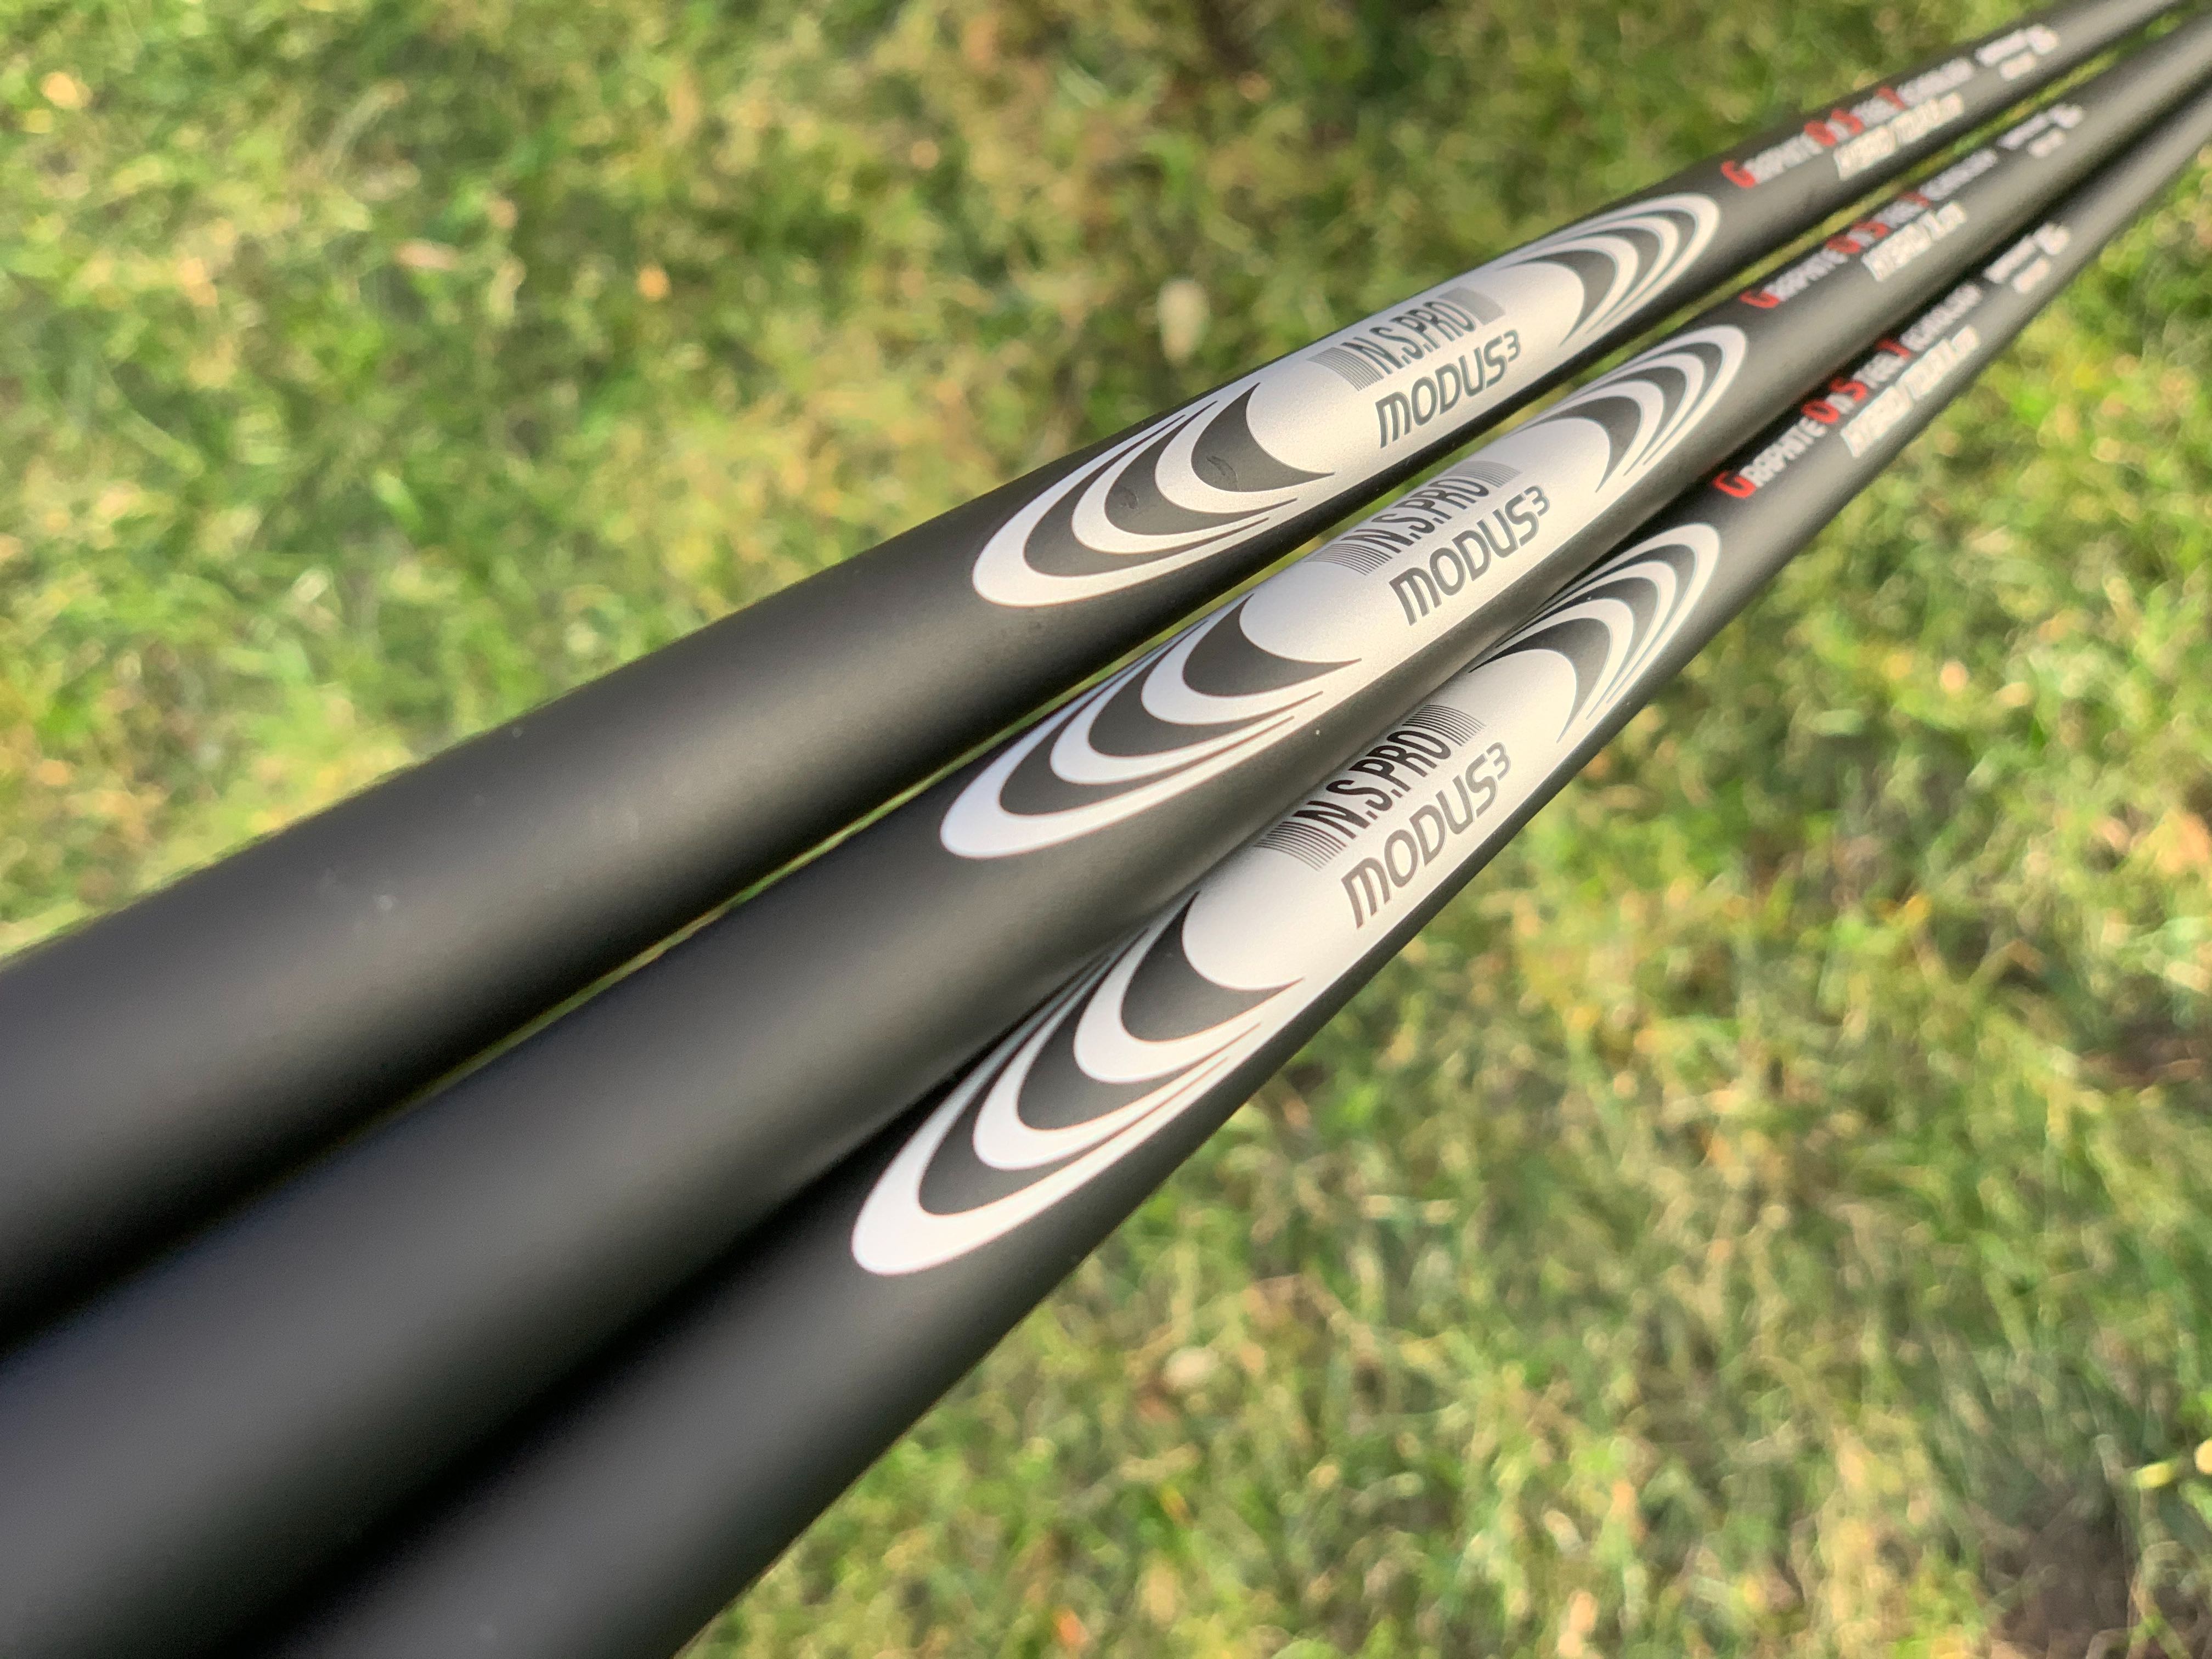 Nippon Golf Launches N.S. Pro Modus³ Graphite on Steel Technology 